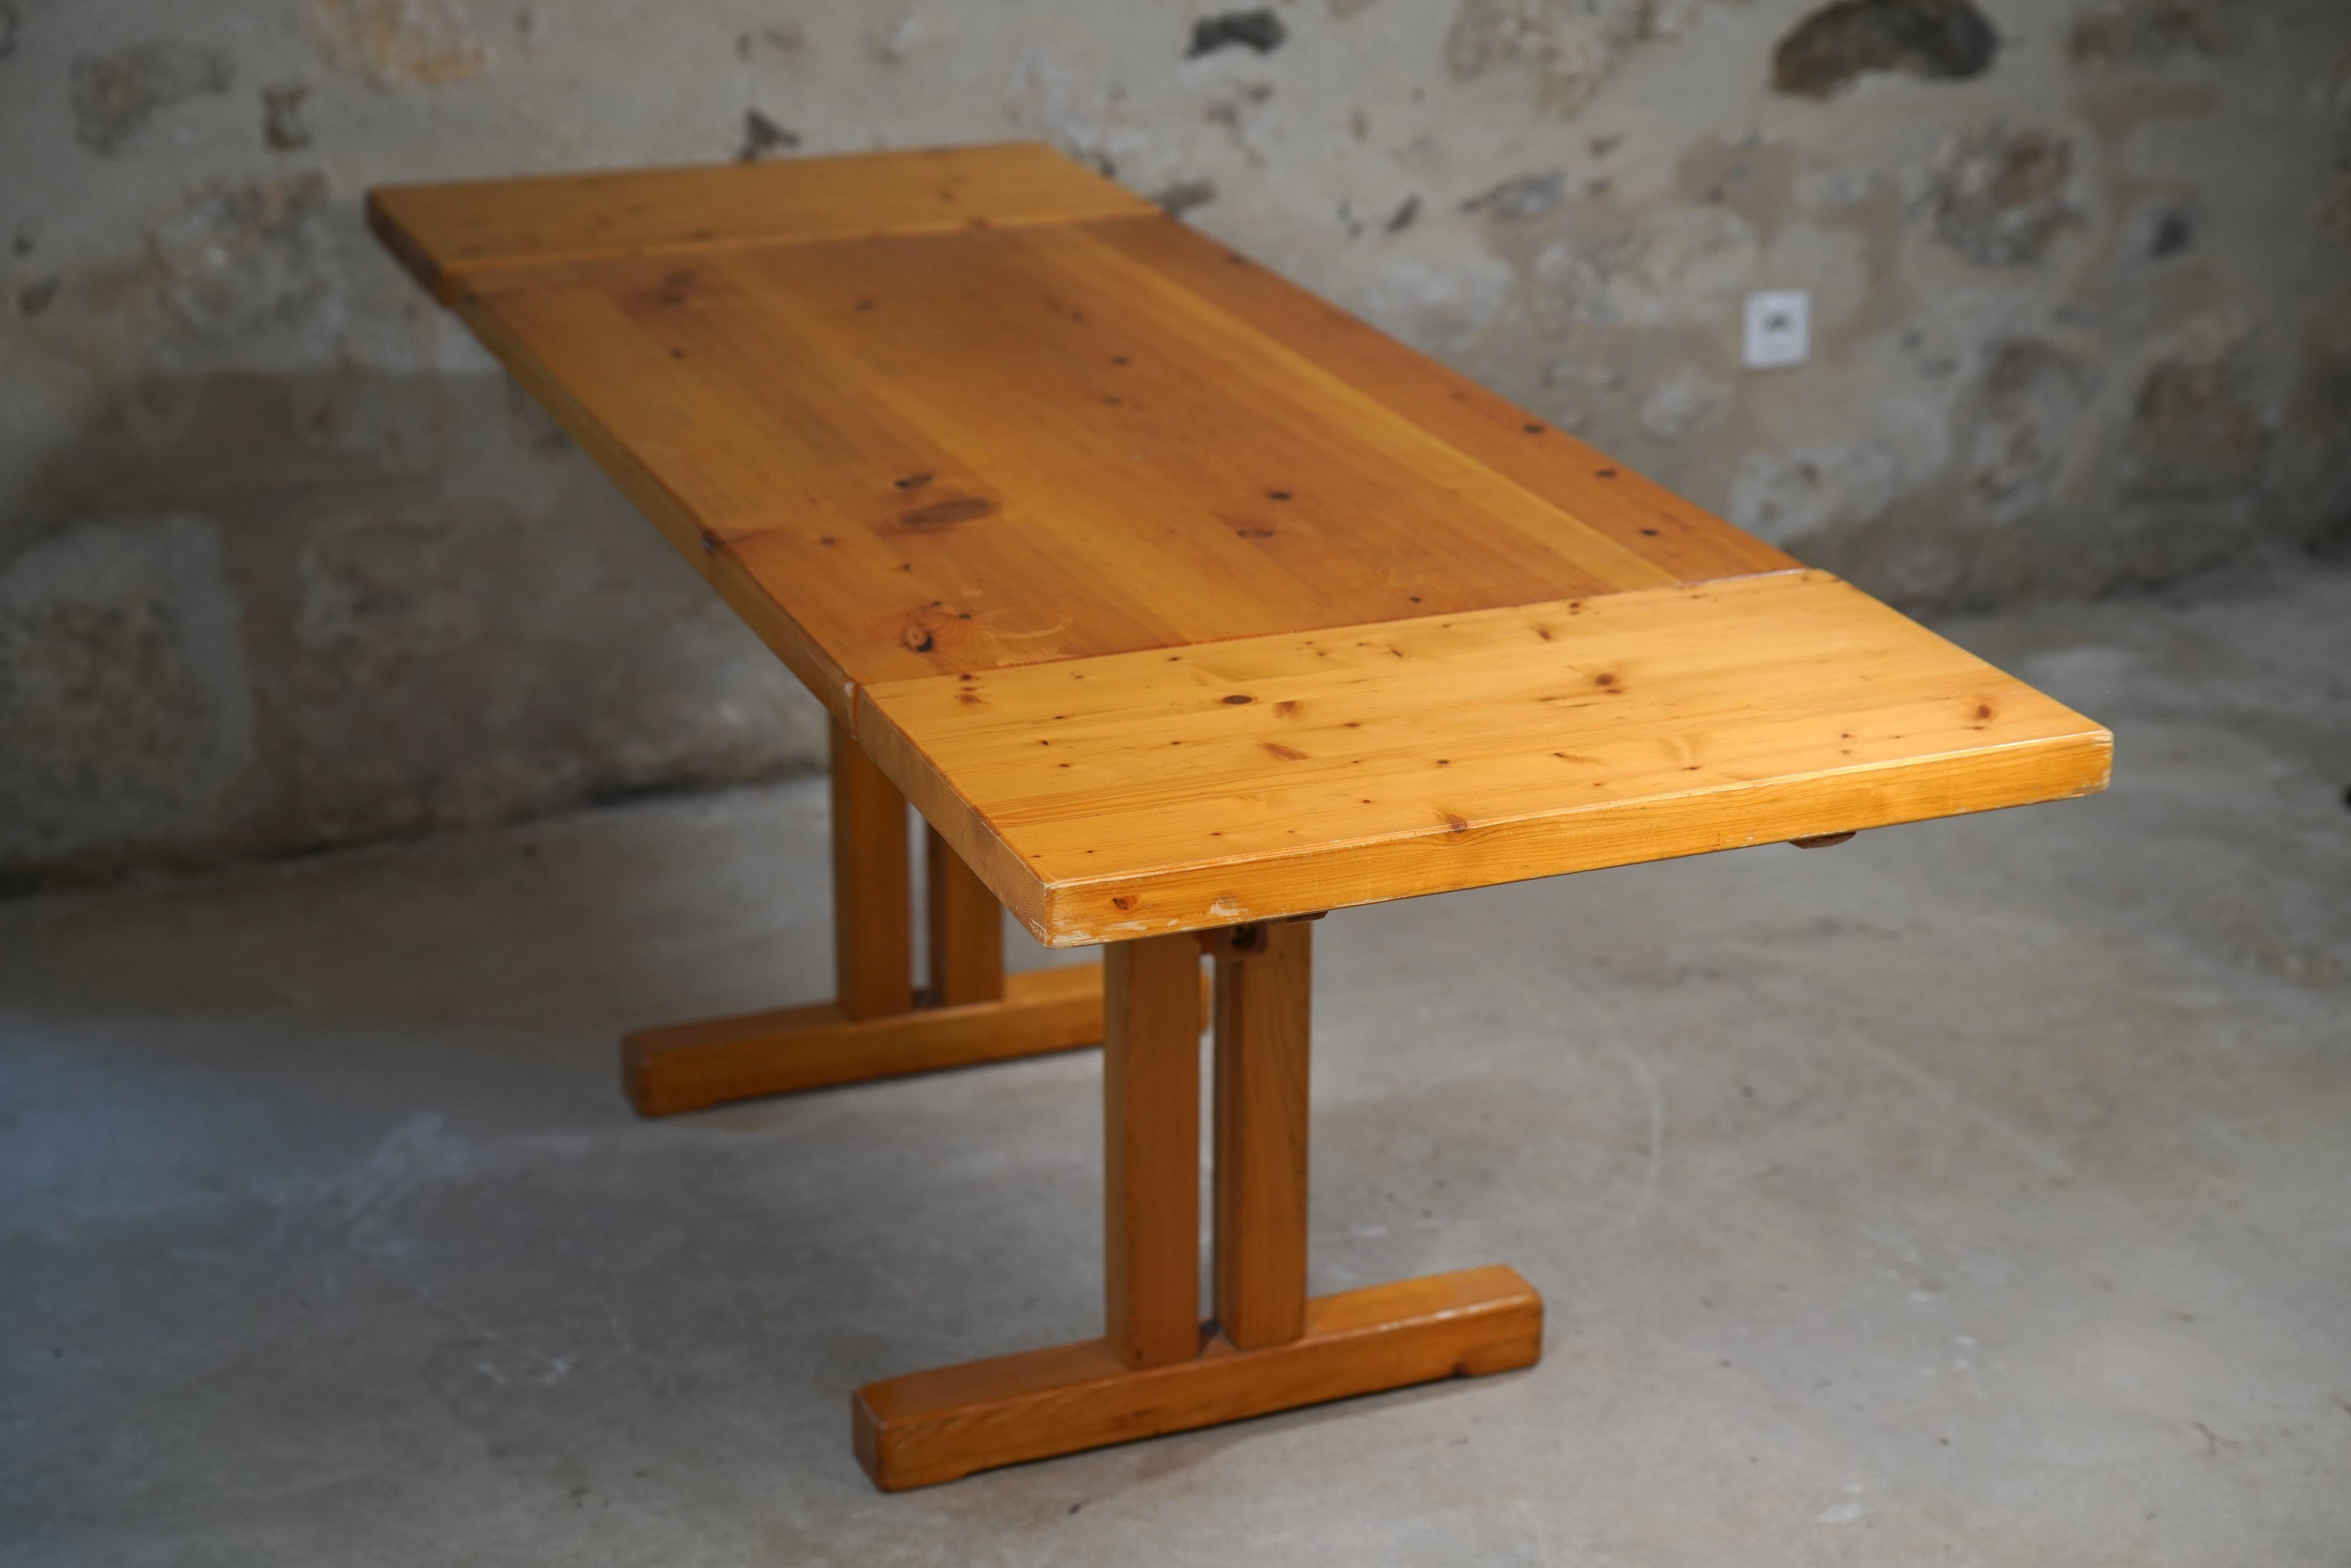 Incredibly rare drop leaf dining table designed by acclaimed architect and designer Charlotte Perriand for the ski resort Les Arcs in Savoie, France in the 1970s.

Very seldom do you see the Perriand Les Arcs dining tables with drop leafs, making